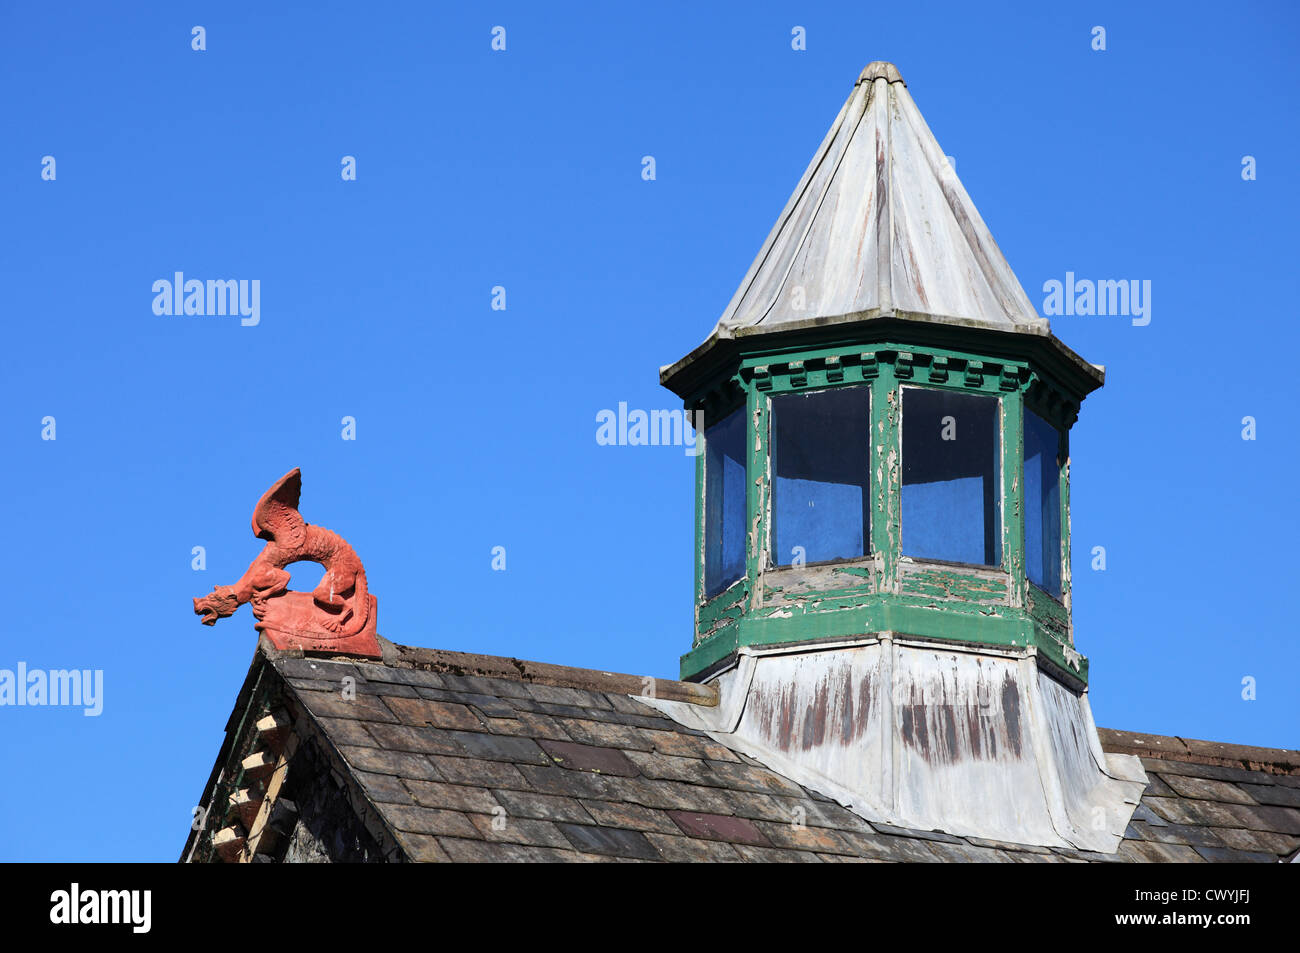 Welsh dragon finial and lantern on roof of Betws y Coed rail station, North Wales, UK Stock Photo